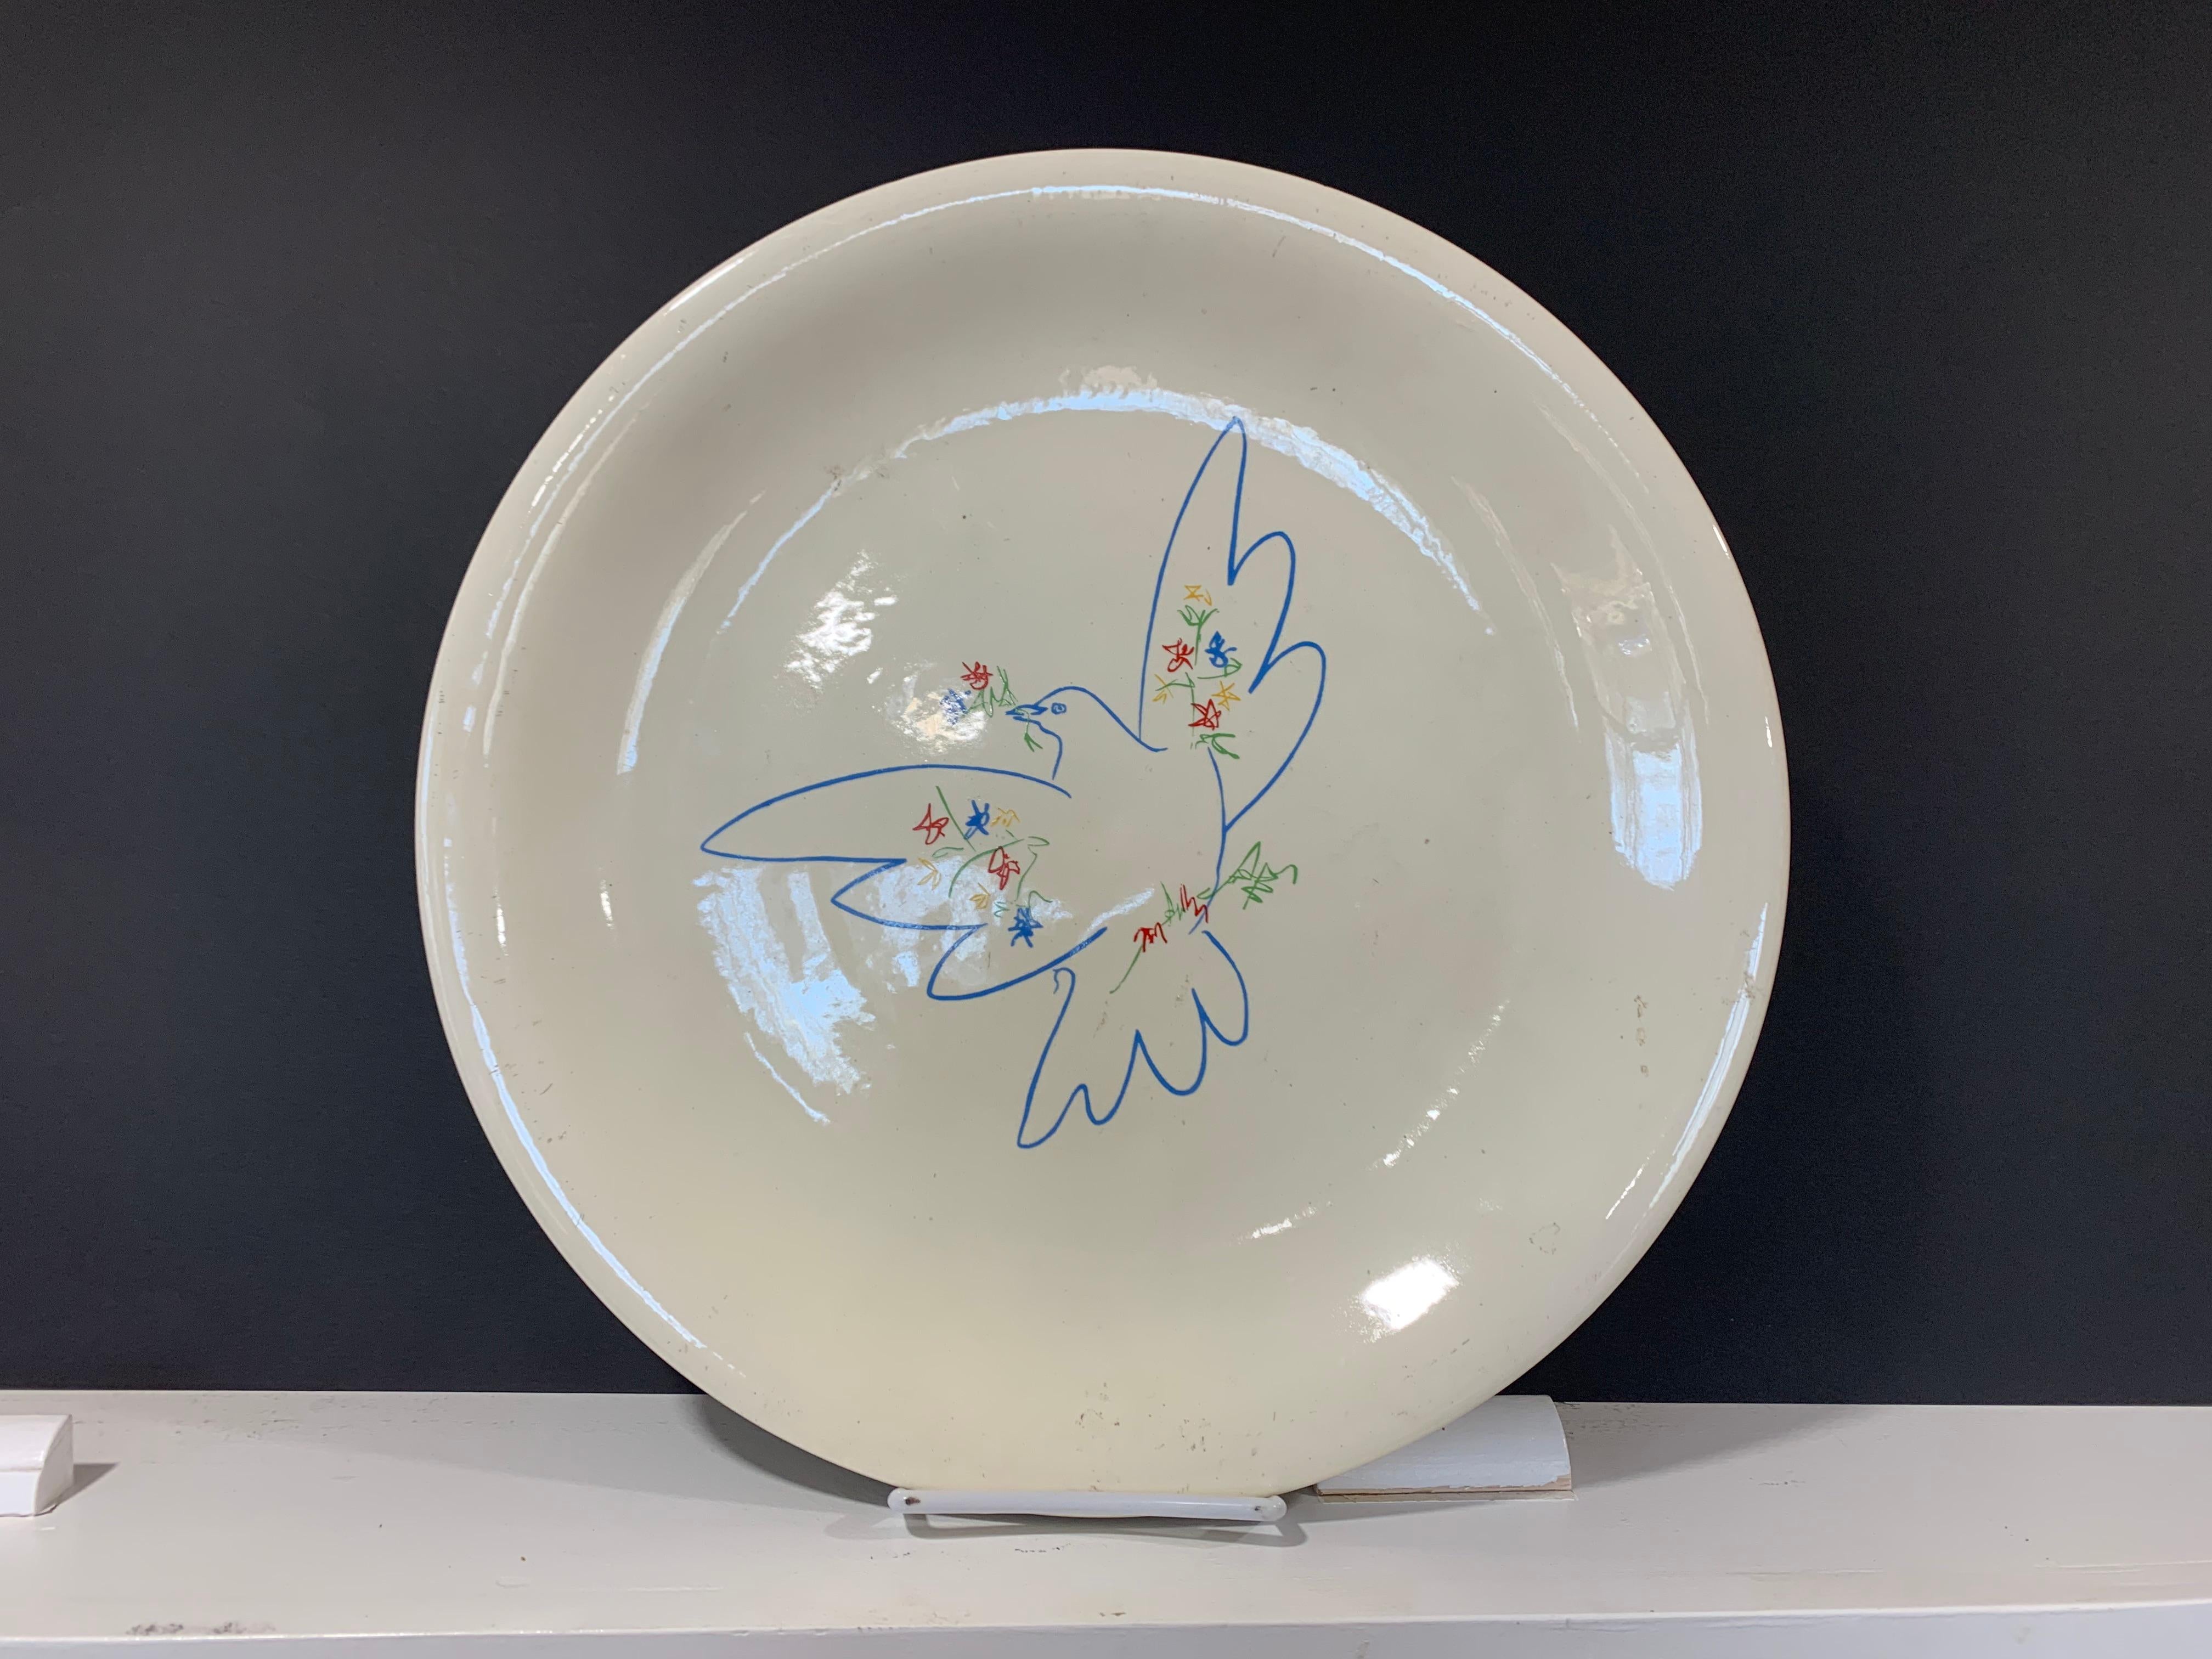 Picasso Peace Dove ceramic plate - Mixed Media Art by Pablo Picasso